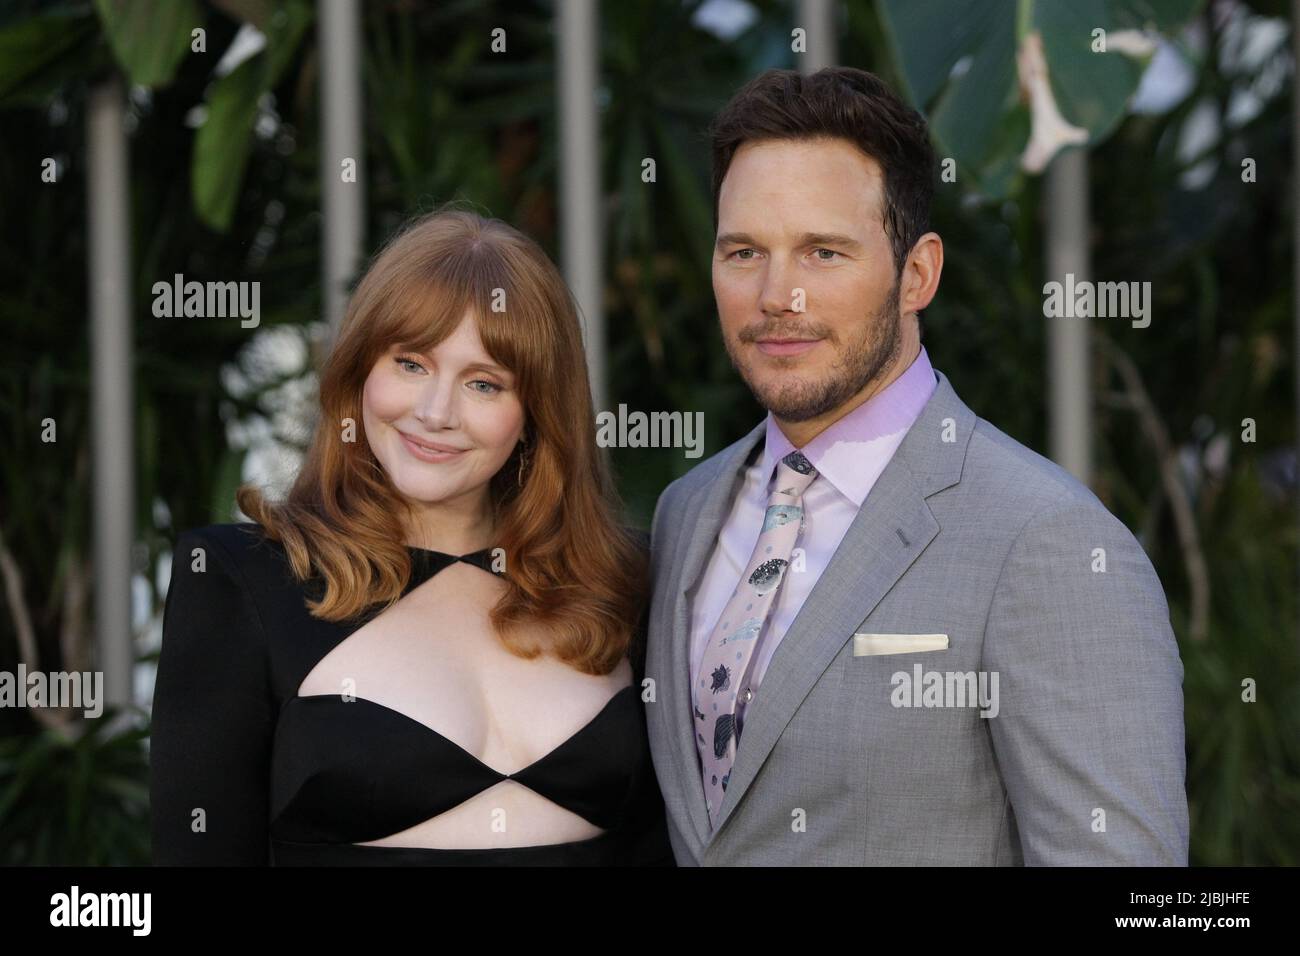 Los Angeles, USA. 07th June, 2022. Bryce Dallas Howard, Chris Pratt at 'Jurassic World: Dominion' World Premiere held at the TCL Chinese Theatre, Hollywood, CA, June 6, 2022. Photo Credit: Joseph Martinez/PictureLux Credit: PictureLux/The Hollywood Archive/Alamy Live News Stock Photo